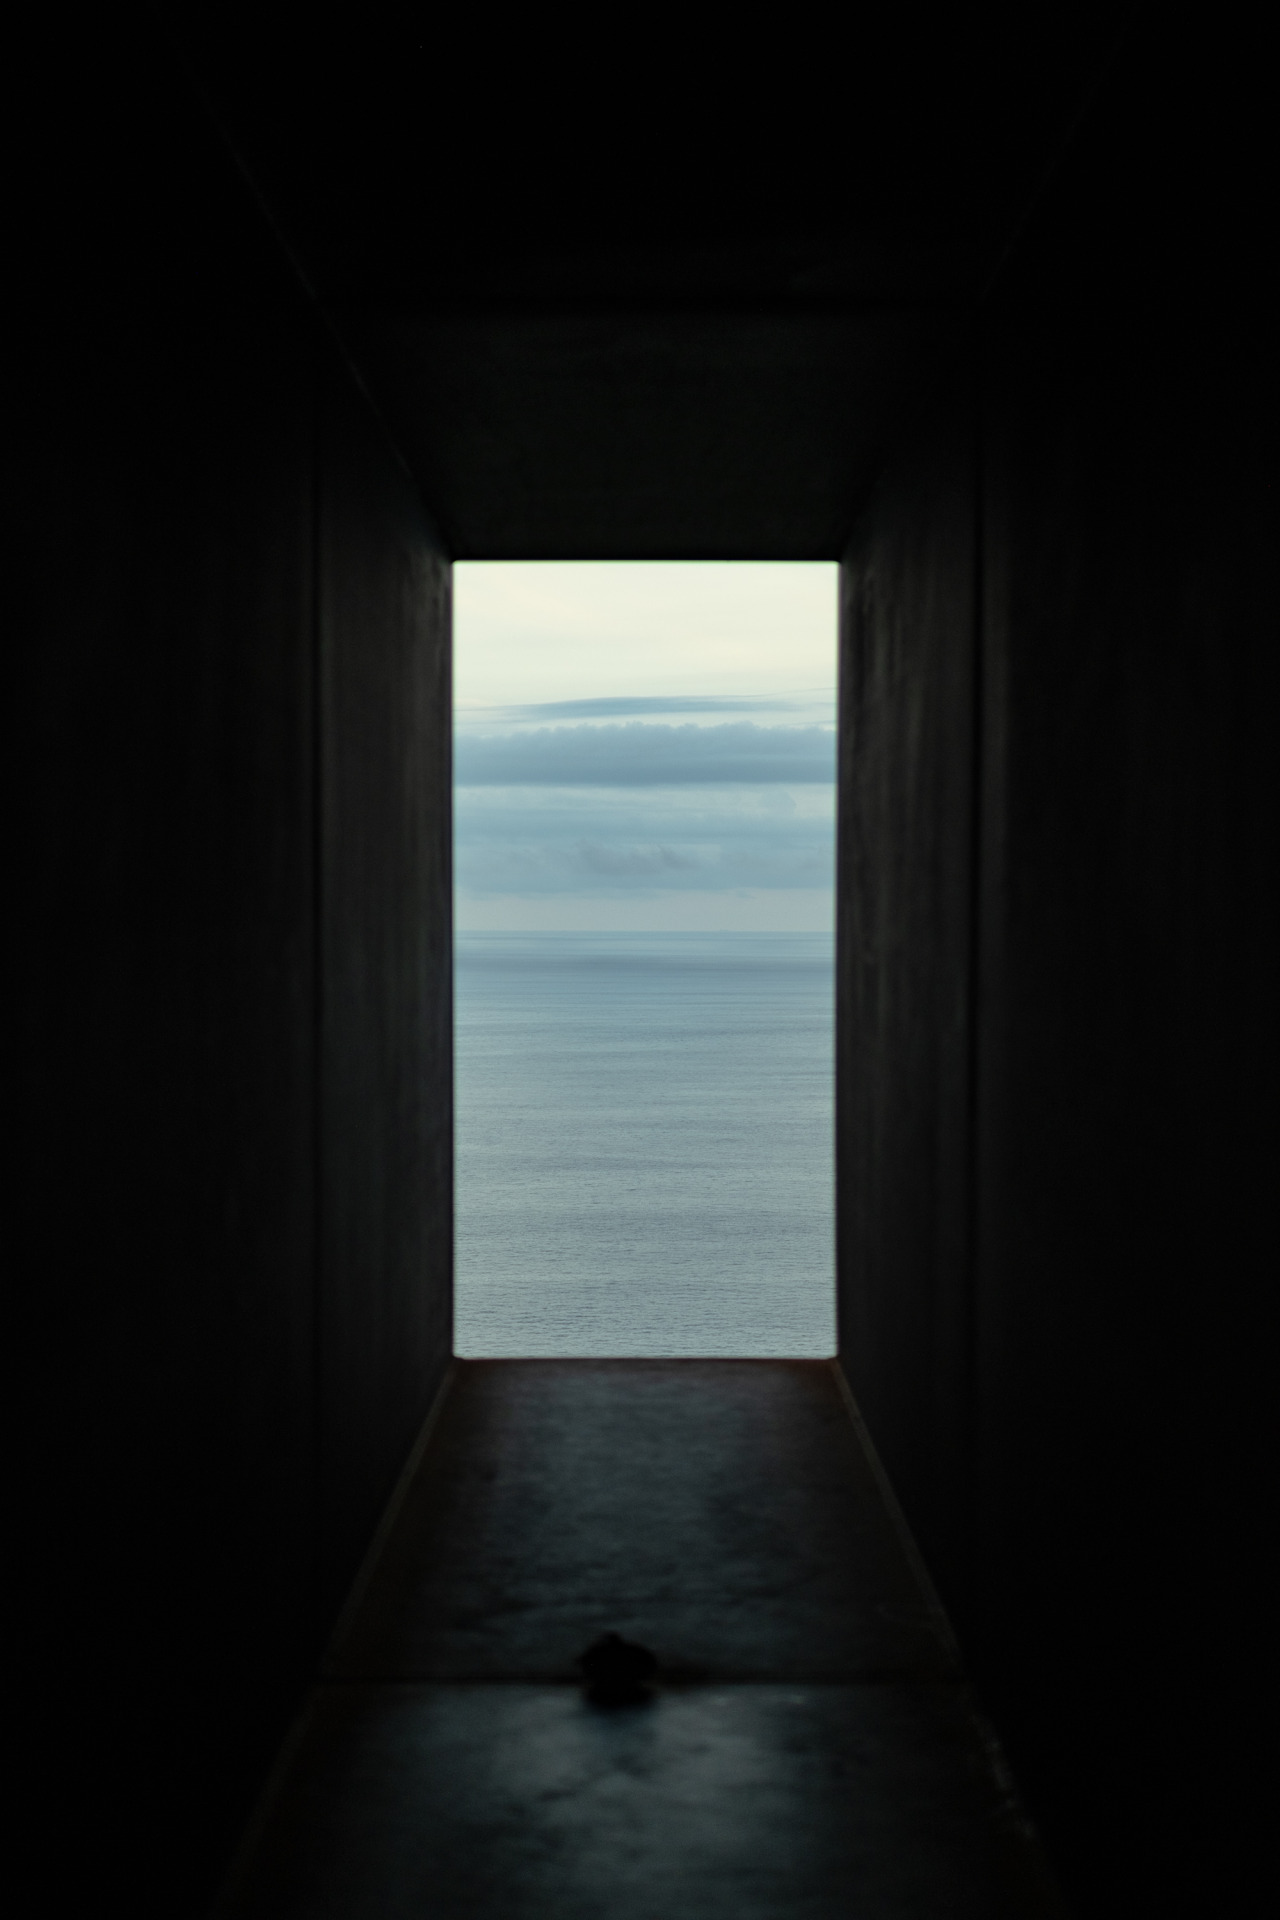 A view of the blue ocean is framed by a dark tunnel